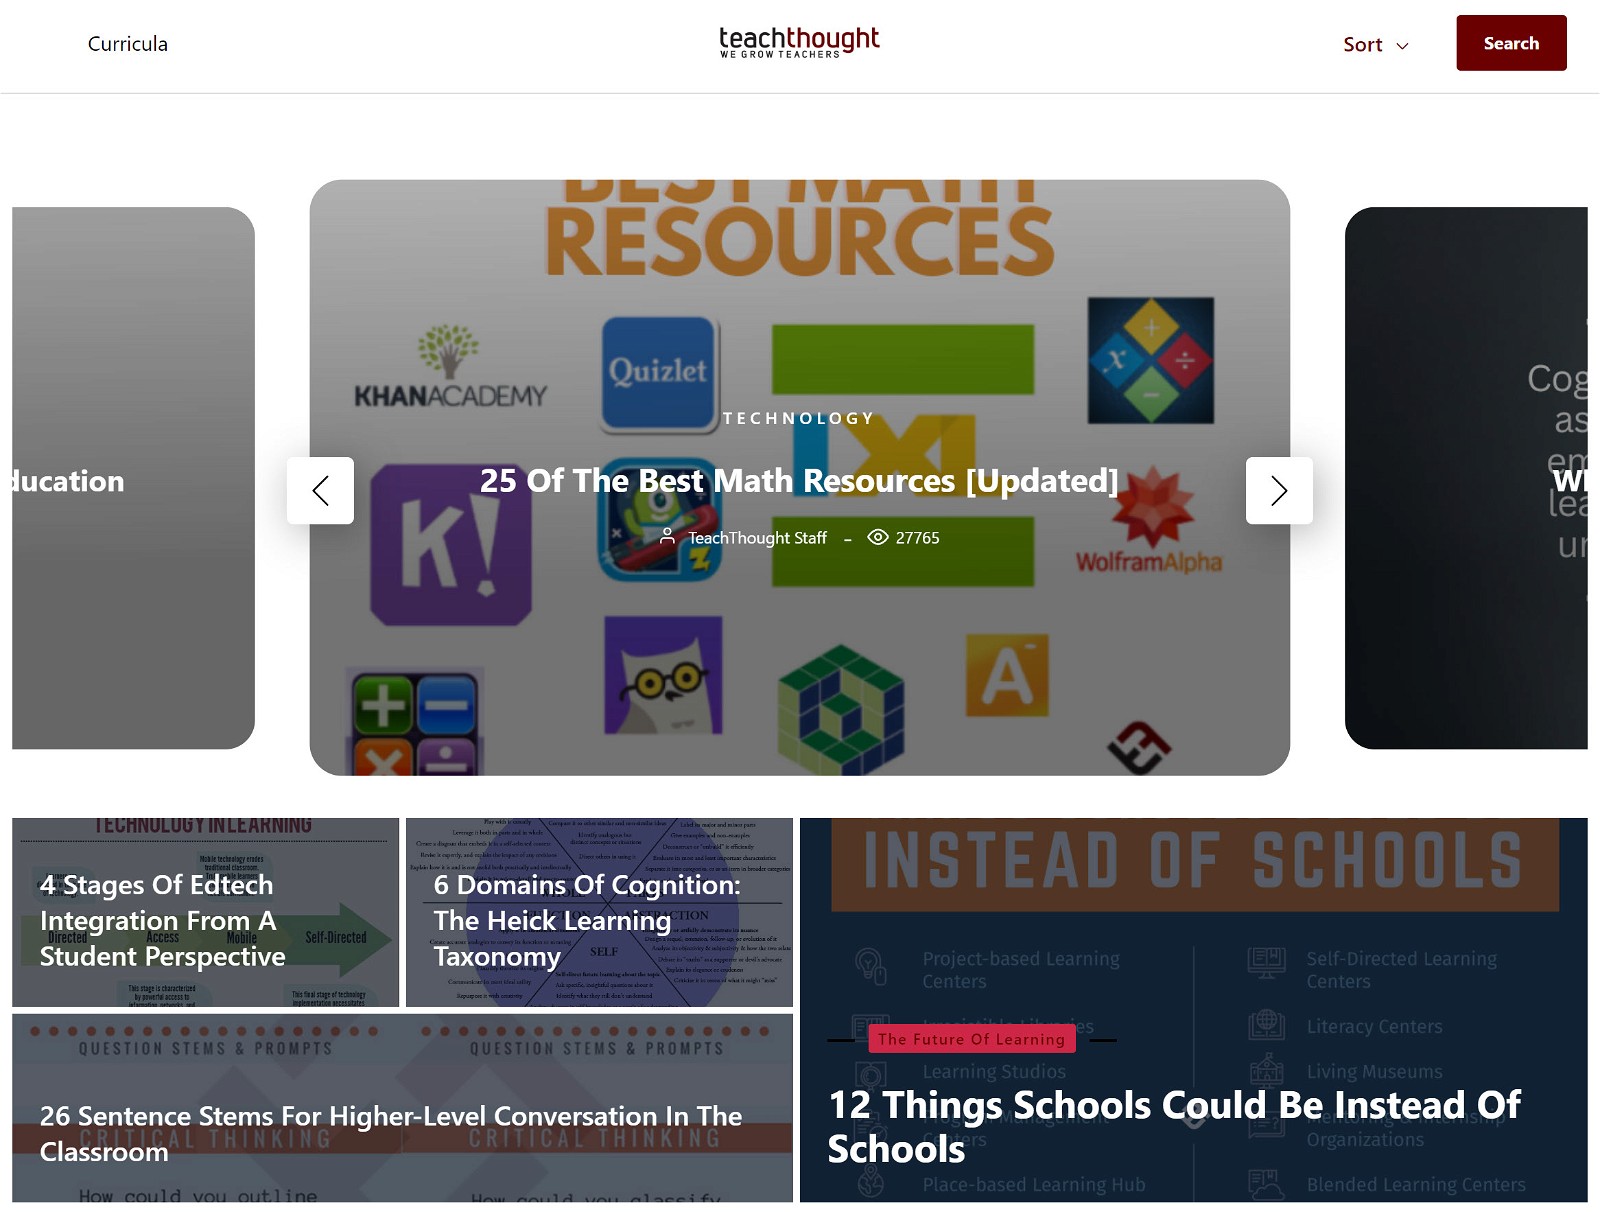 TeachThought Homepage